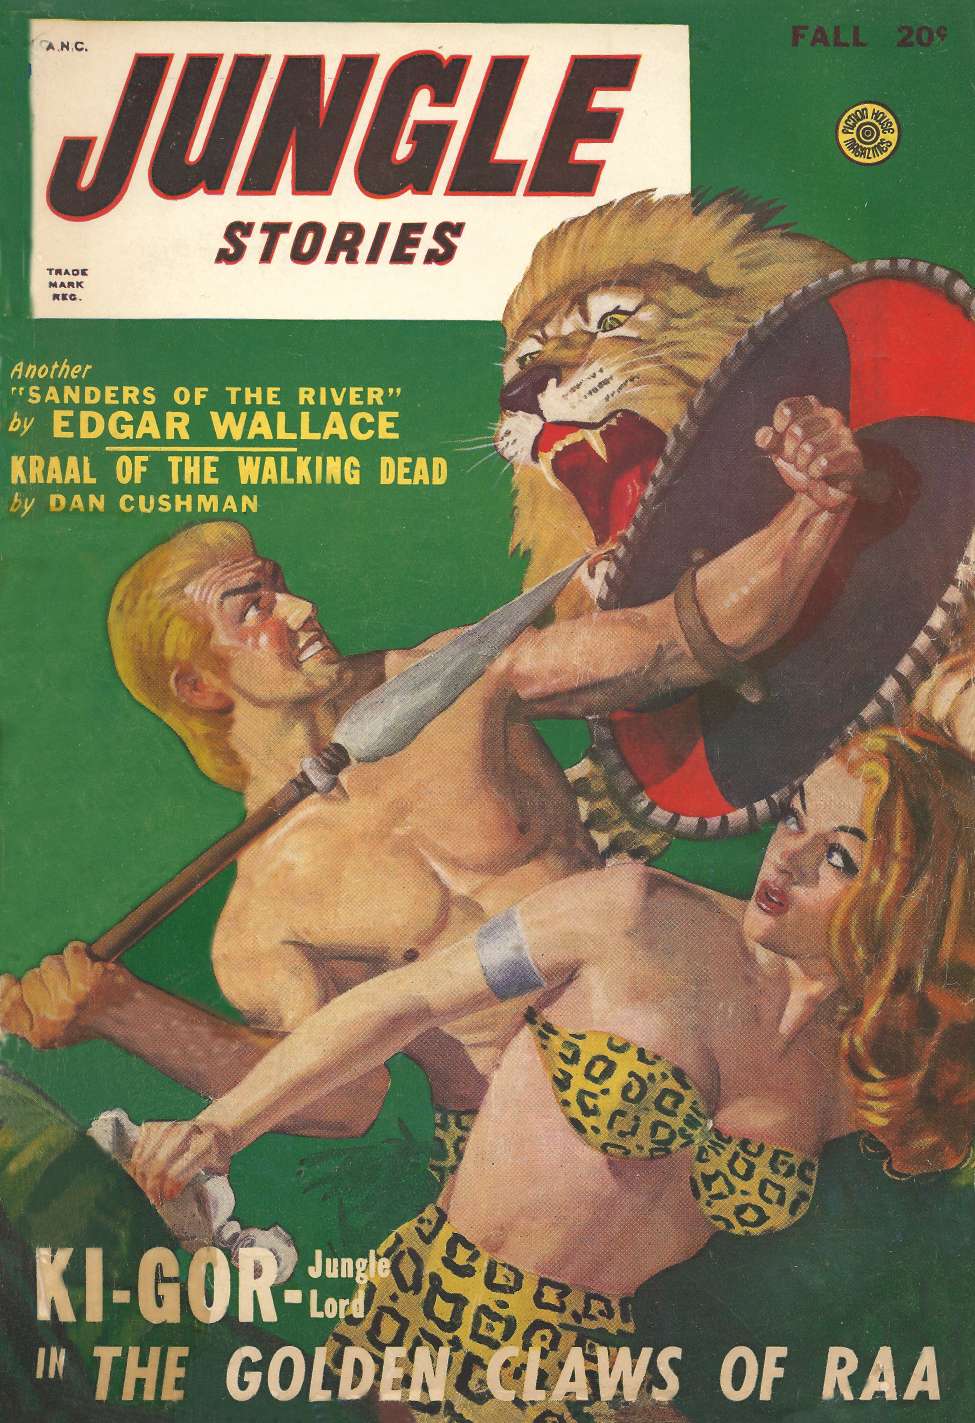 Comic Book Cover For Jungle Stories v4 4 - The Golden Claws of Raa - John Peter Drummond